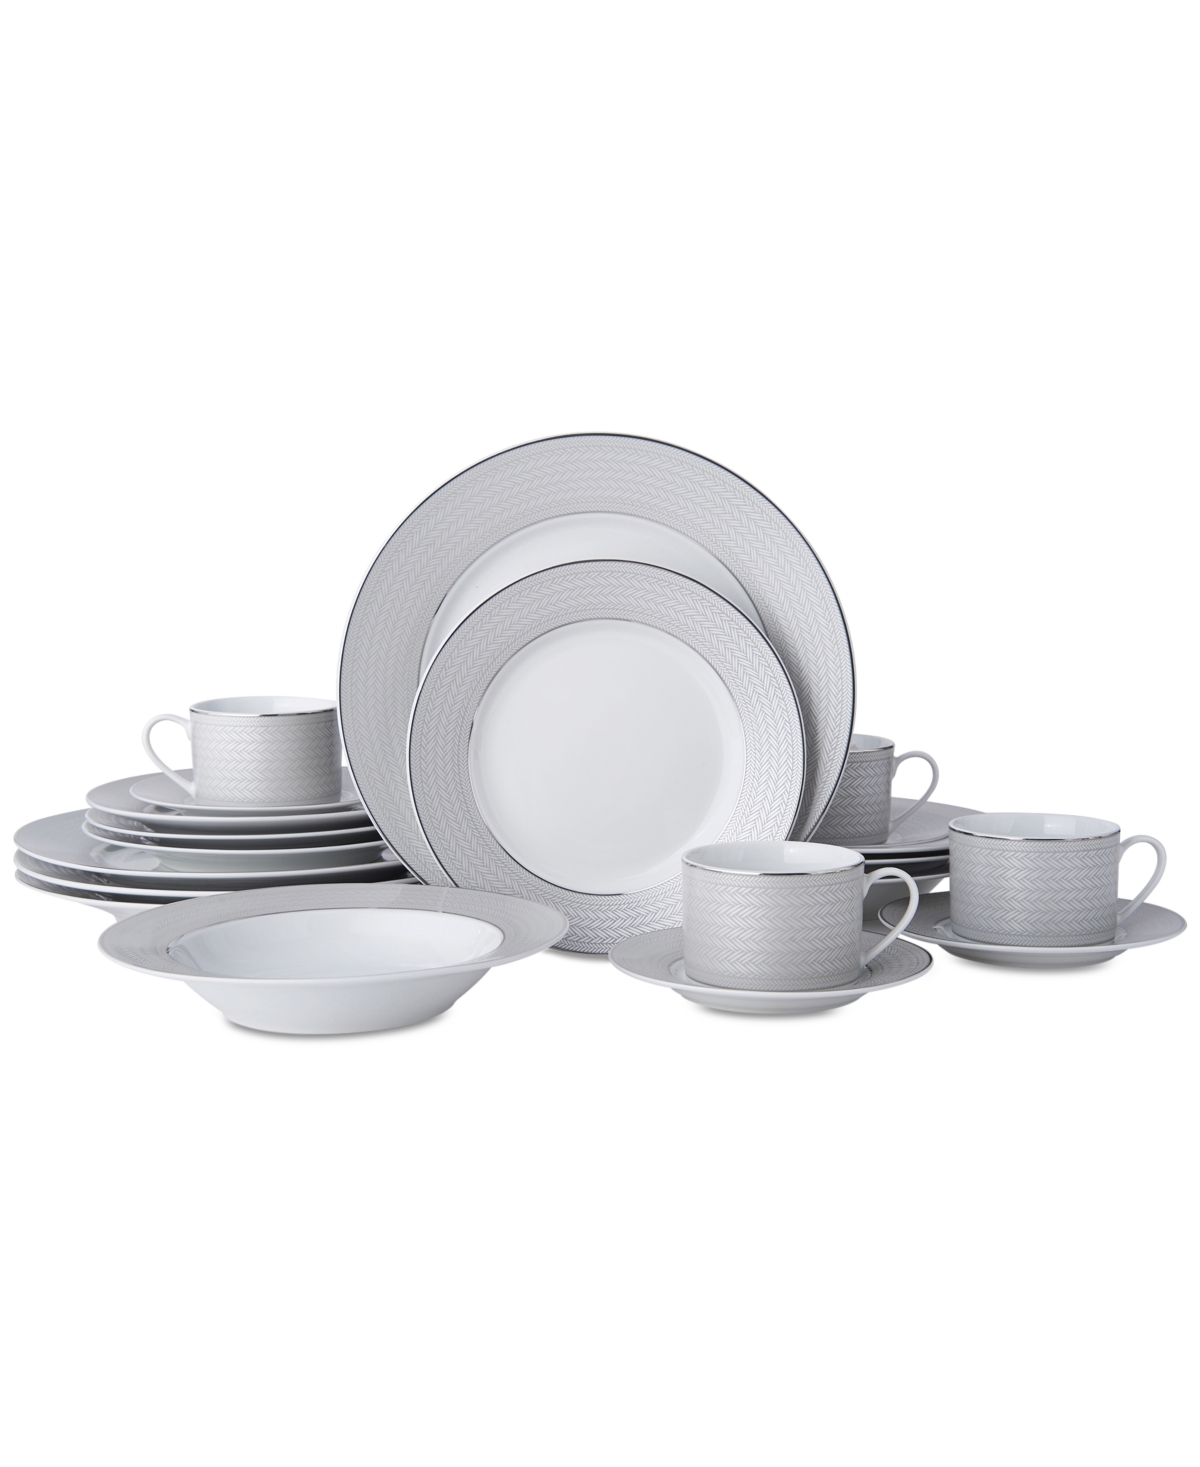 Percy 20-Pc. Dinnerware Set, Service for 4 - White